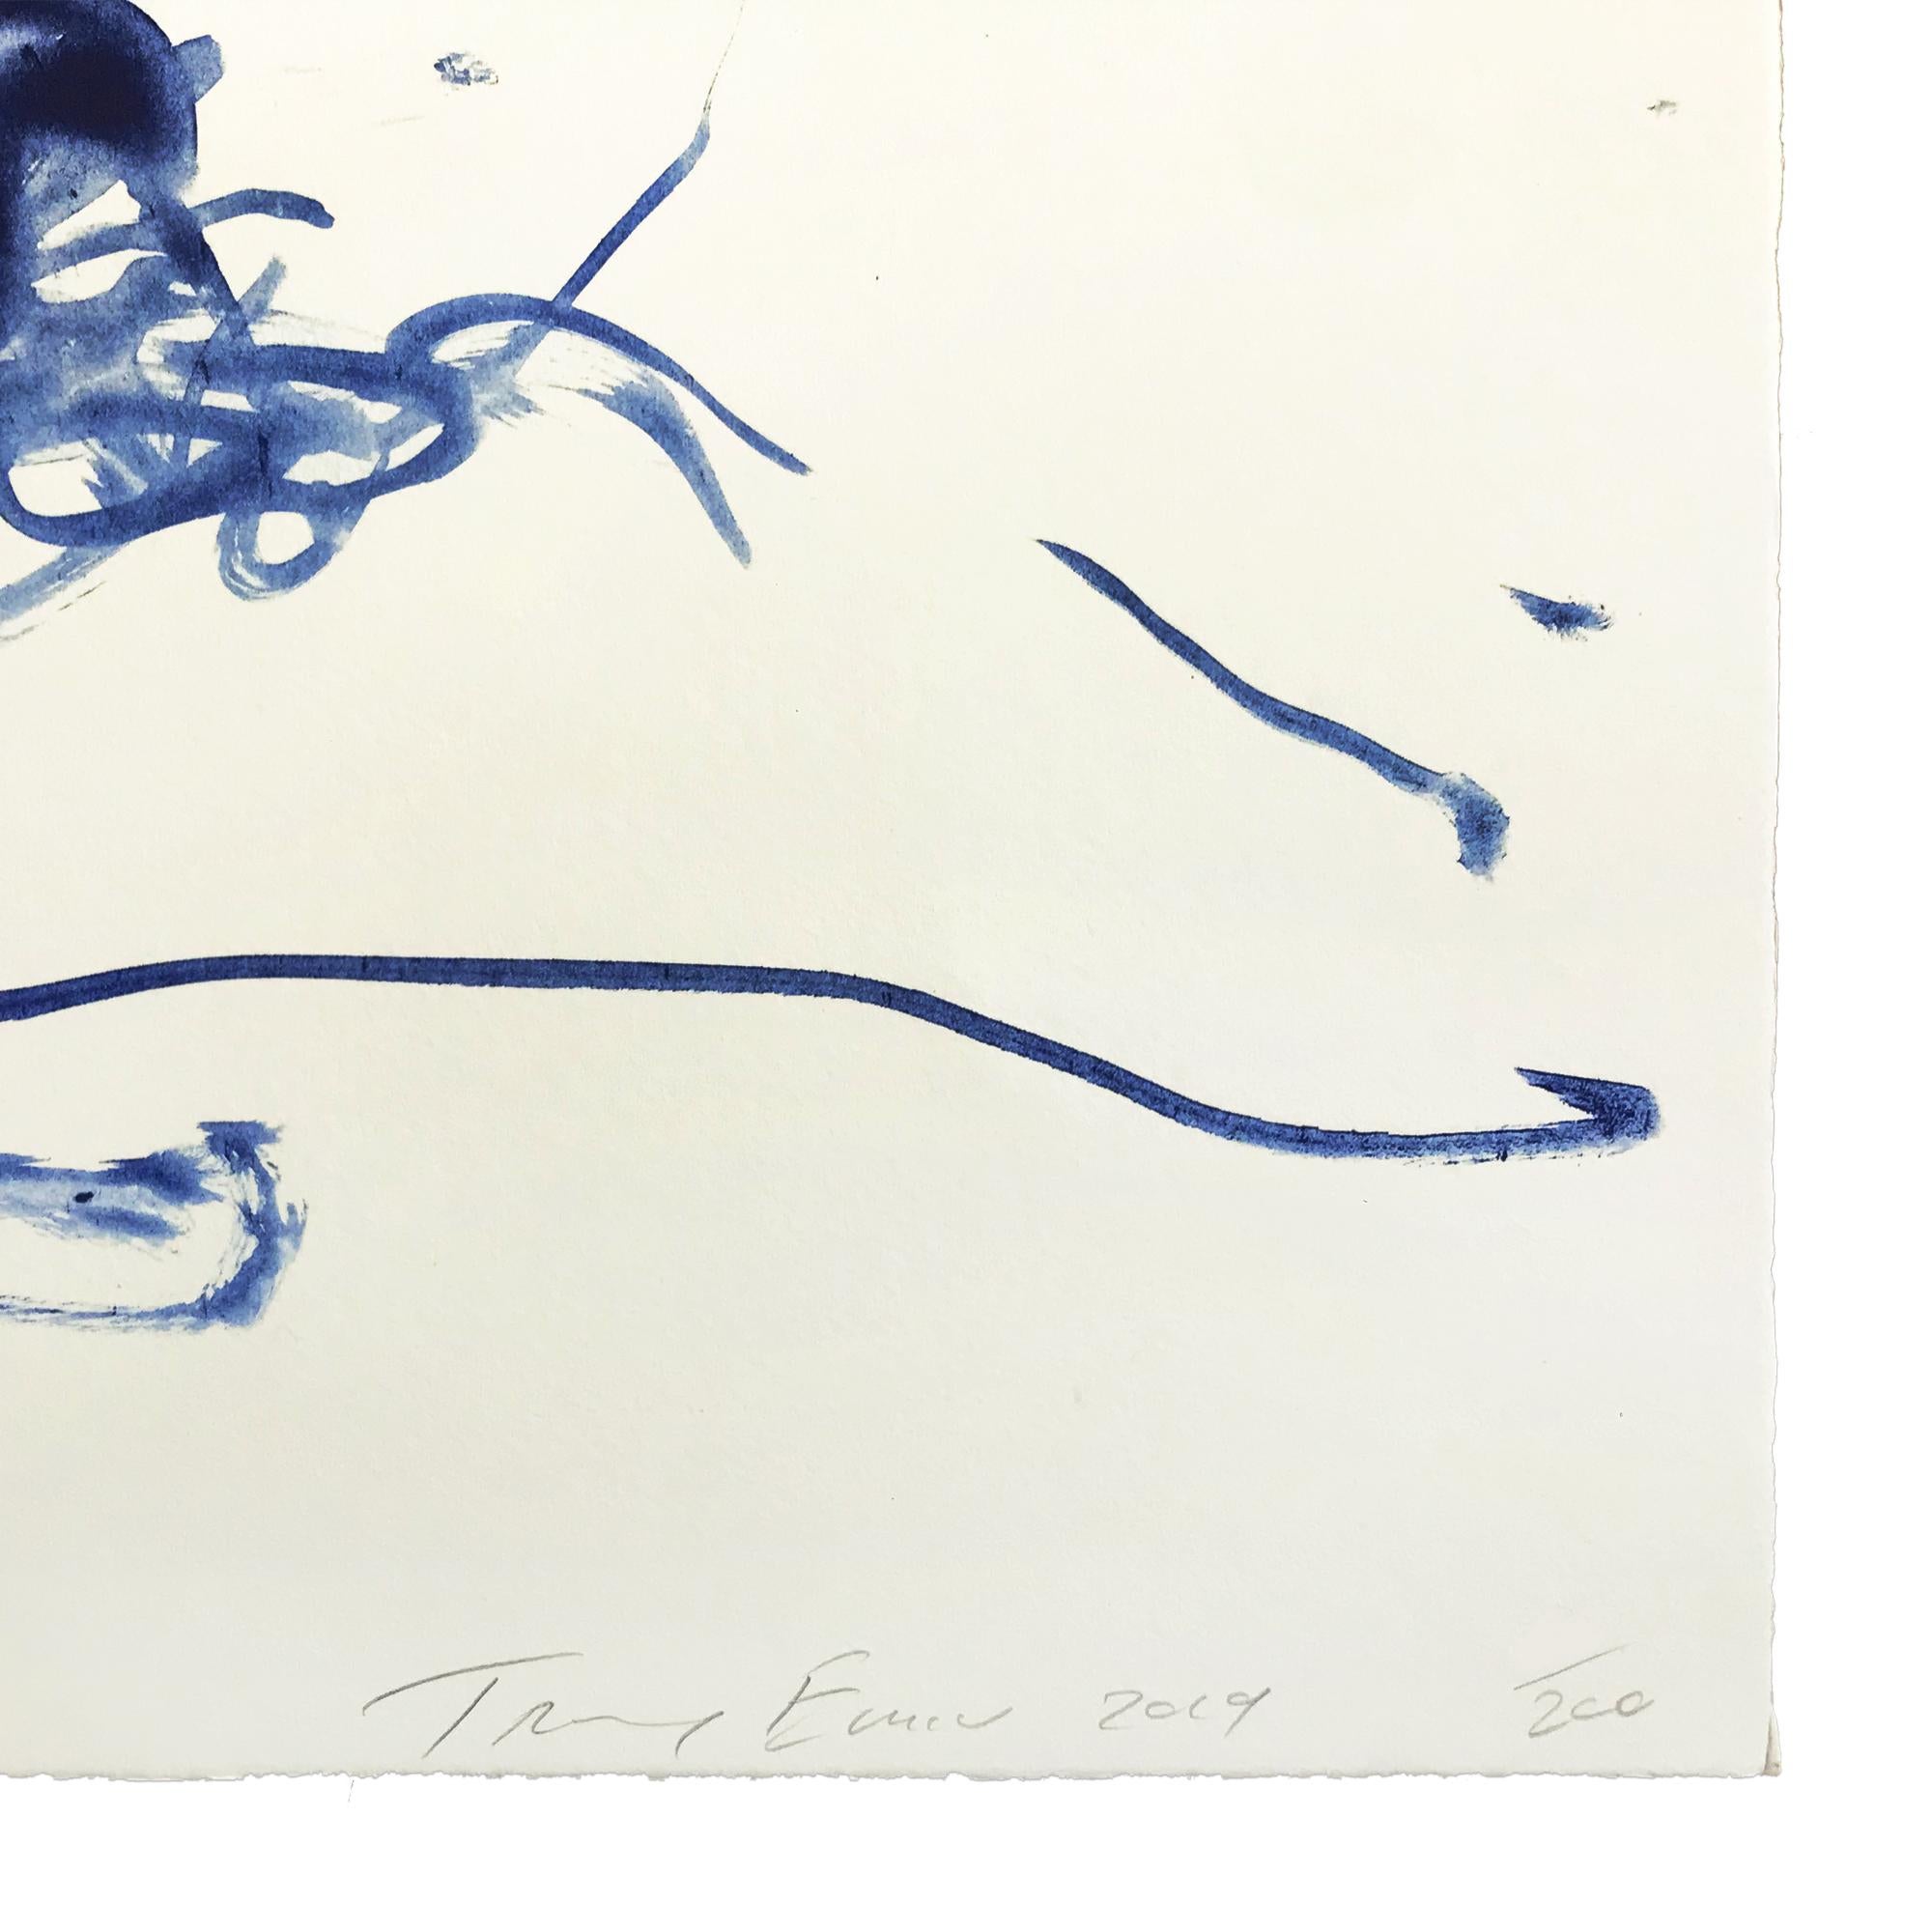 I Loved My Innocence, Young British Artist, Contemporary Art, 21st Century - Print by Tracey Emin